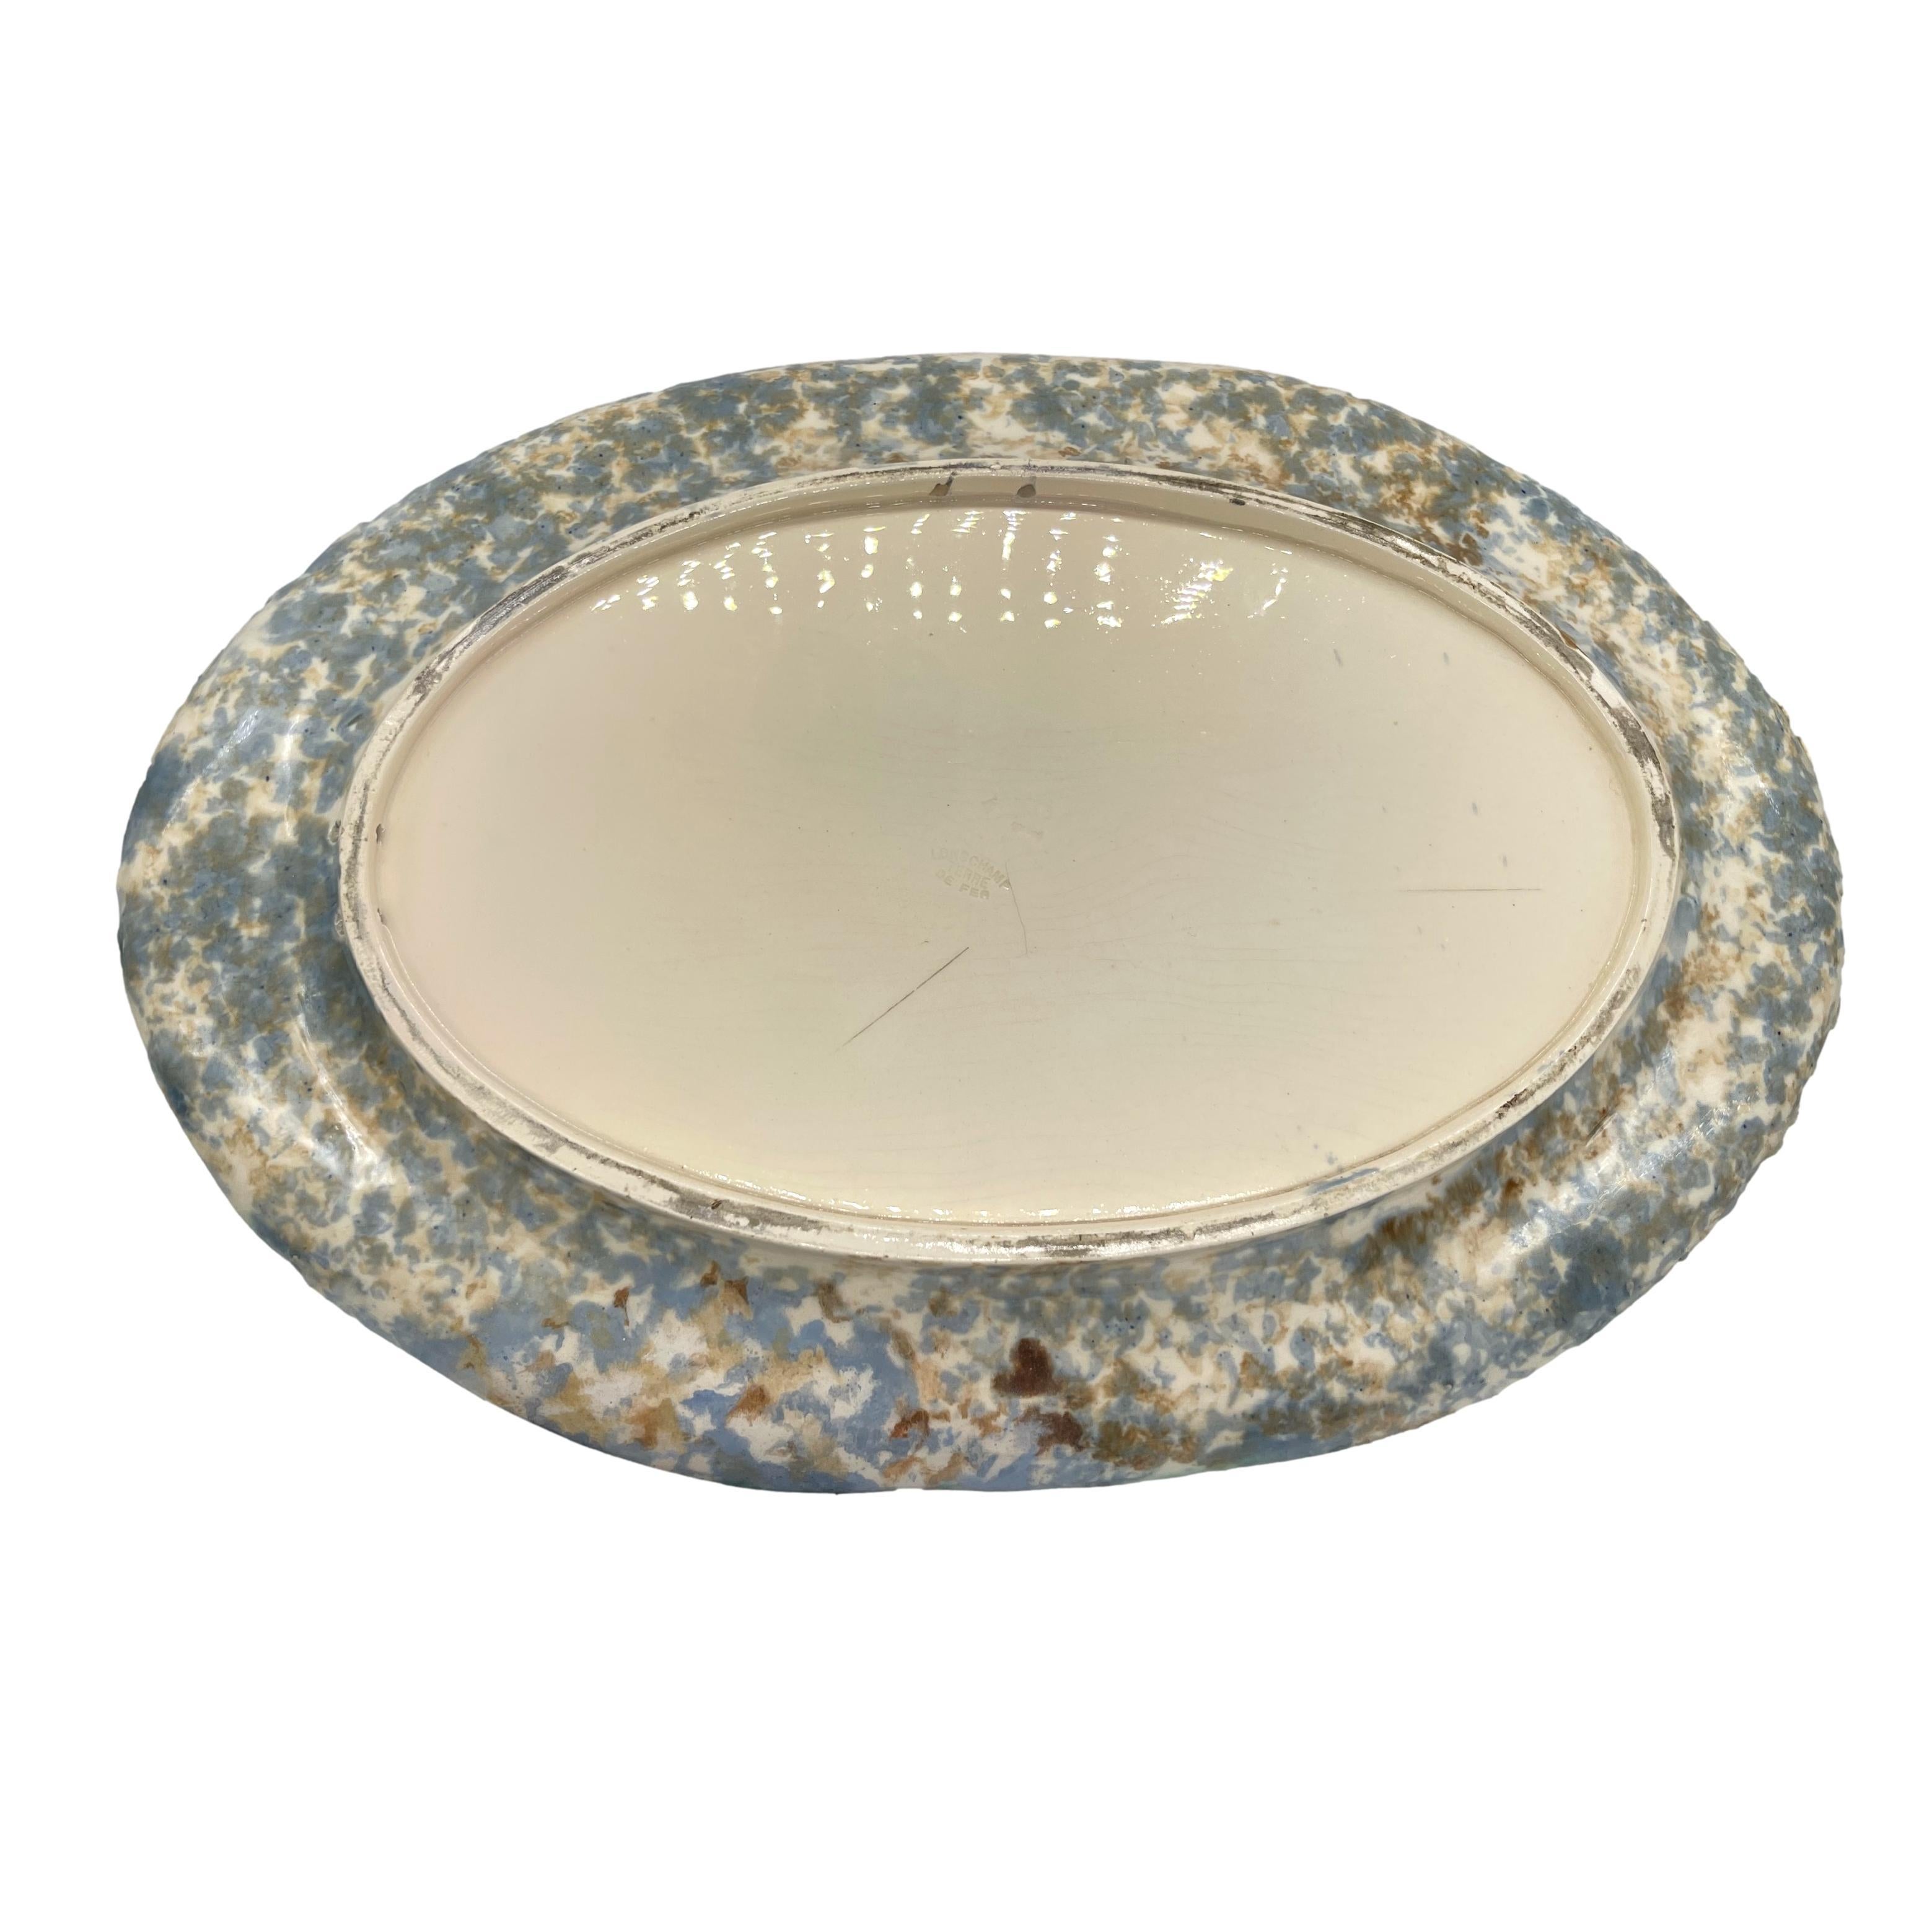 Palissy Ware Trompe L'oeil Oval Platter, Signed Longchamp, French, ca. 1875 For Sale 7